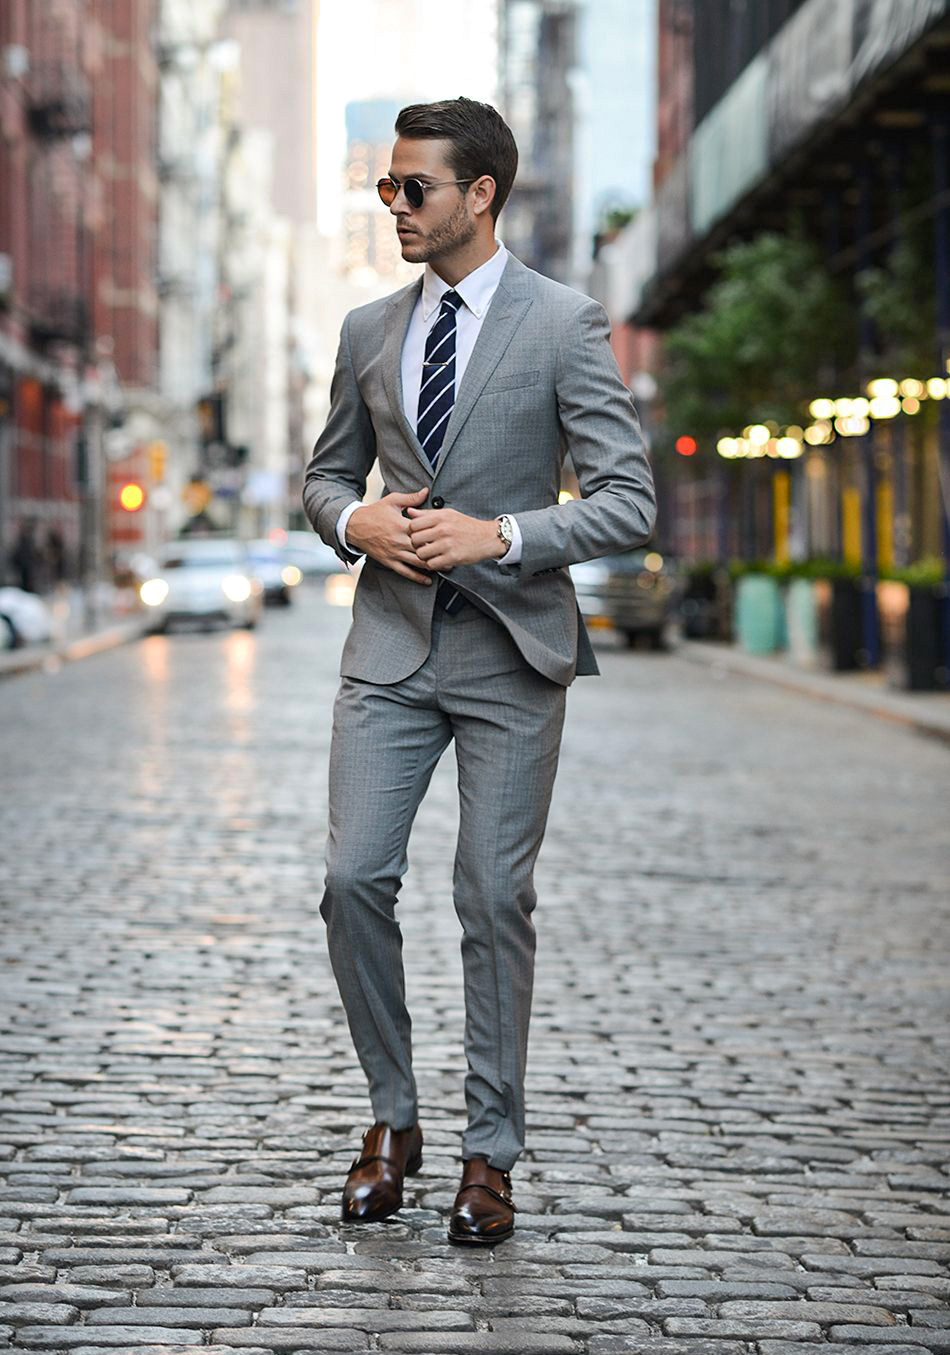 matching shoes with grey suit